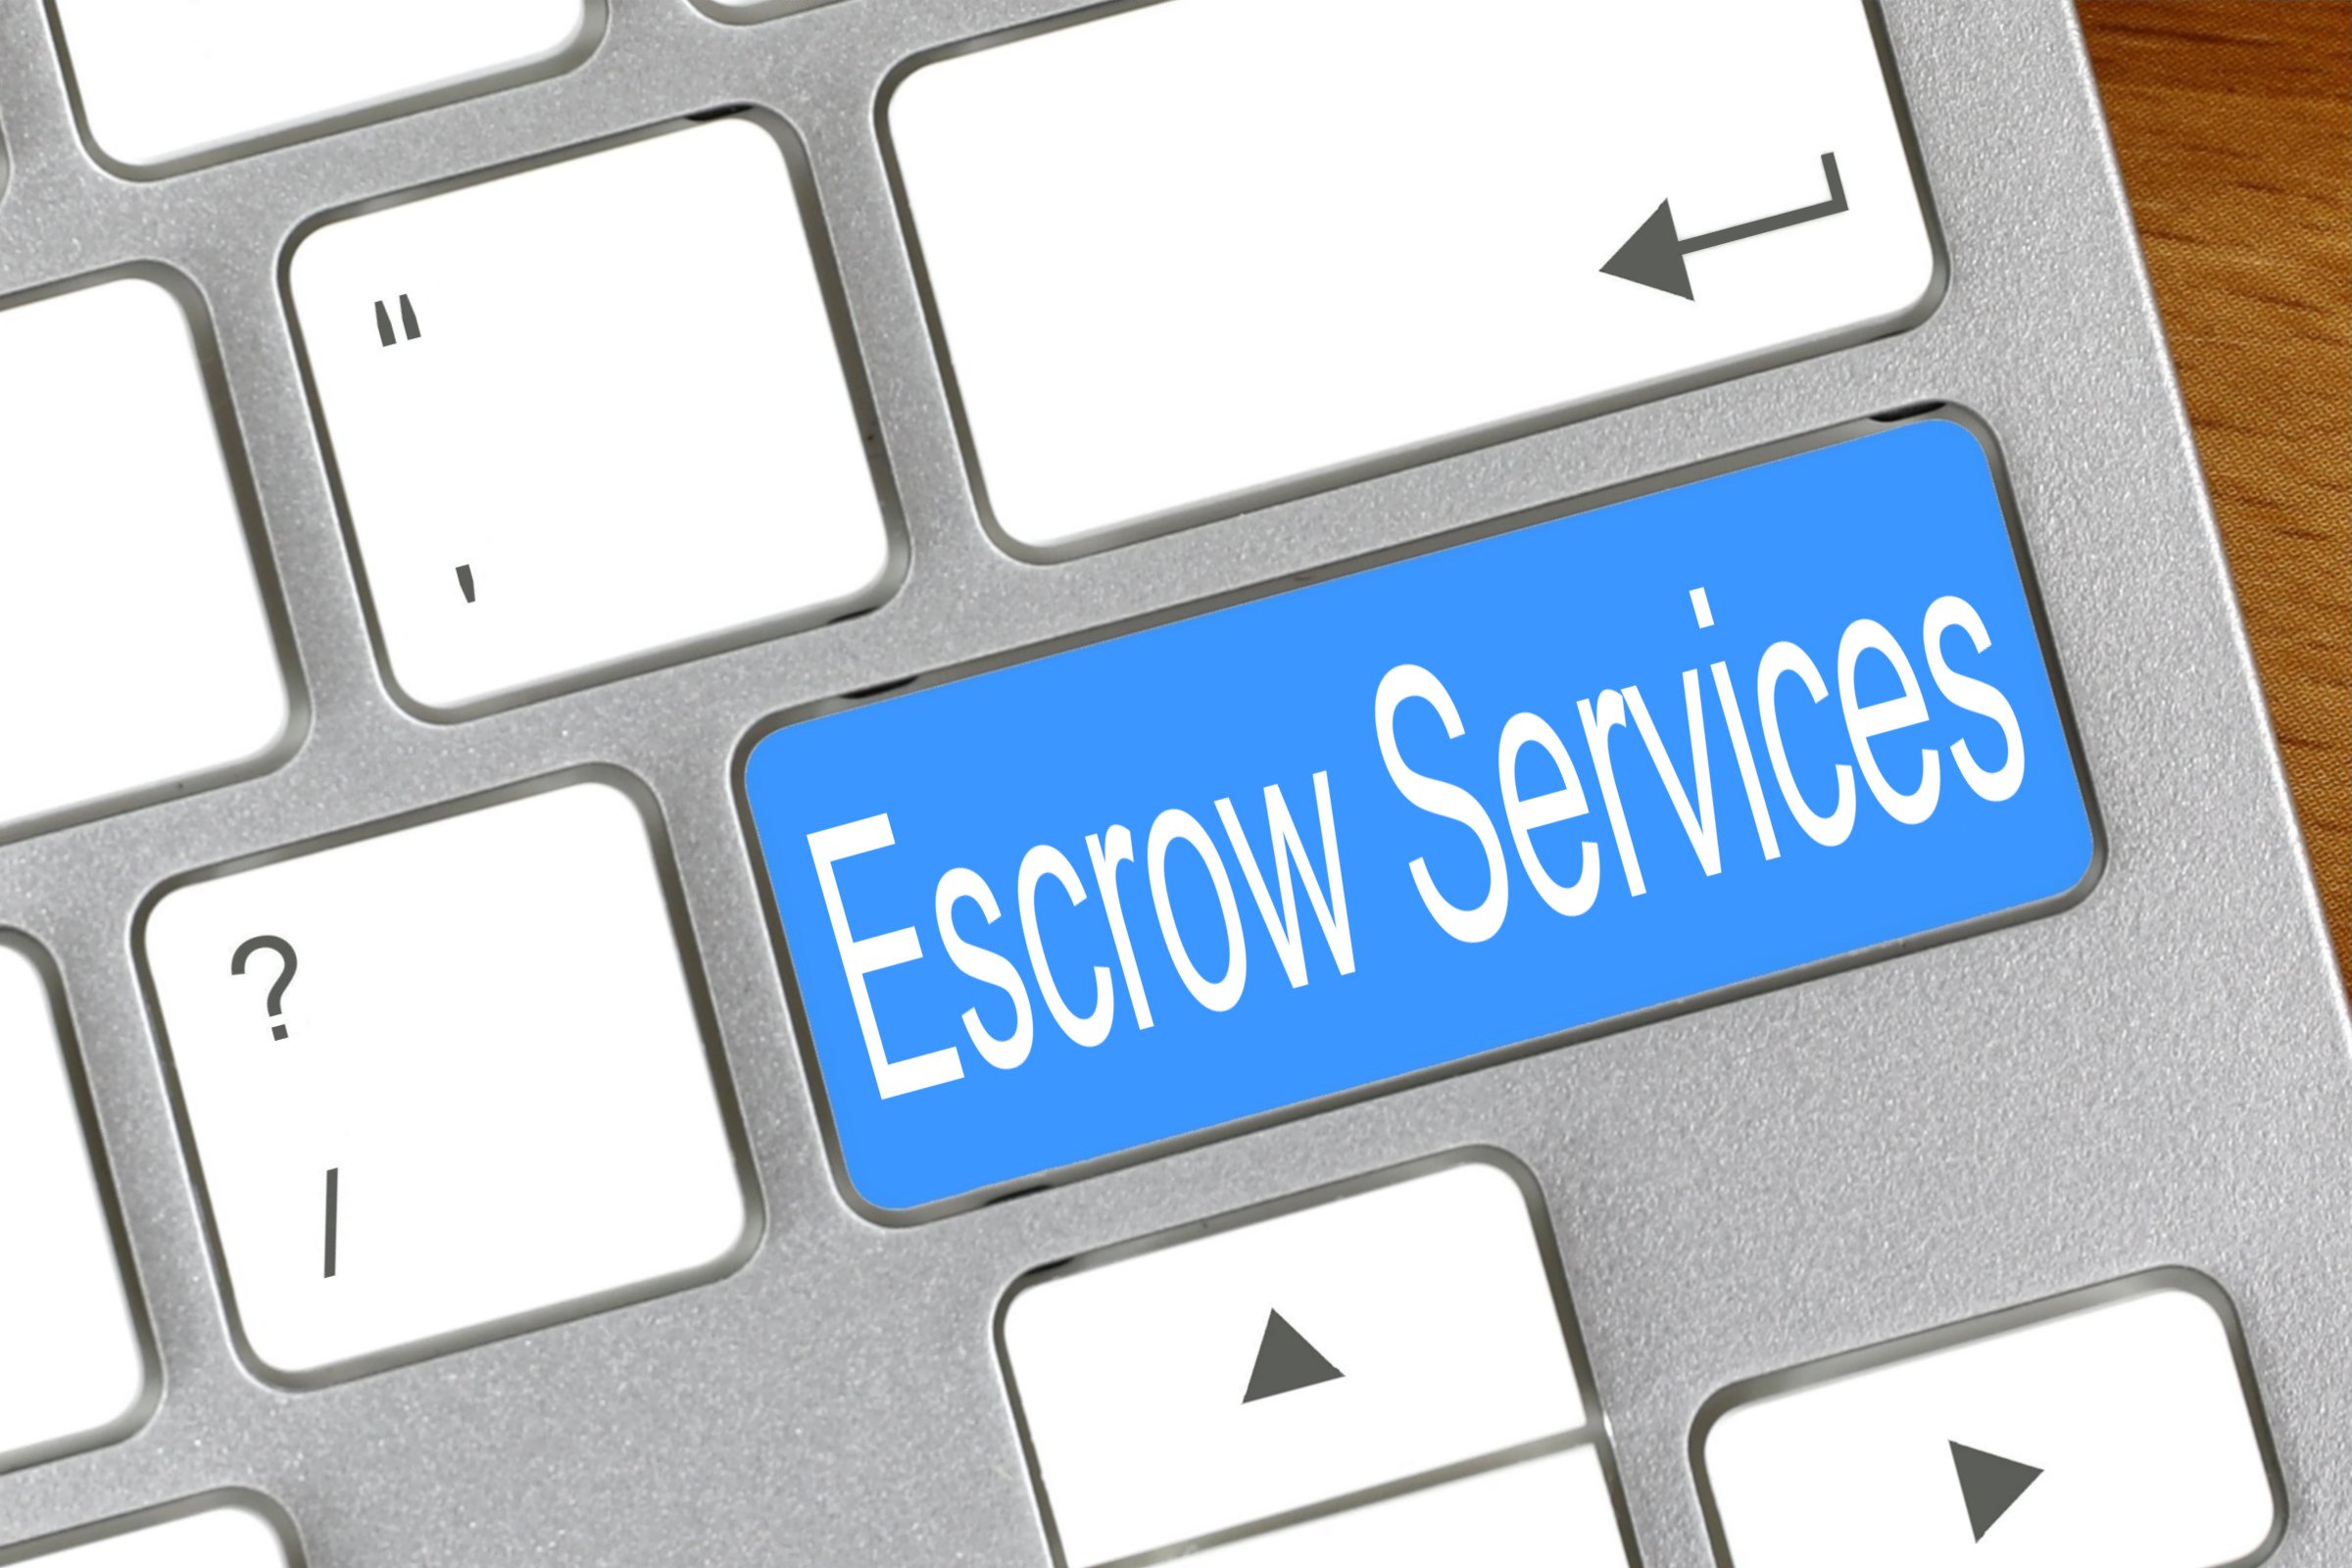 Free Of Charge Creative Commons Escrow Services Image Keyboard 2